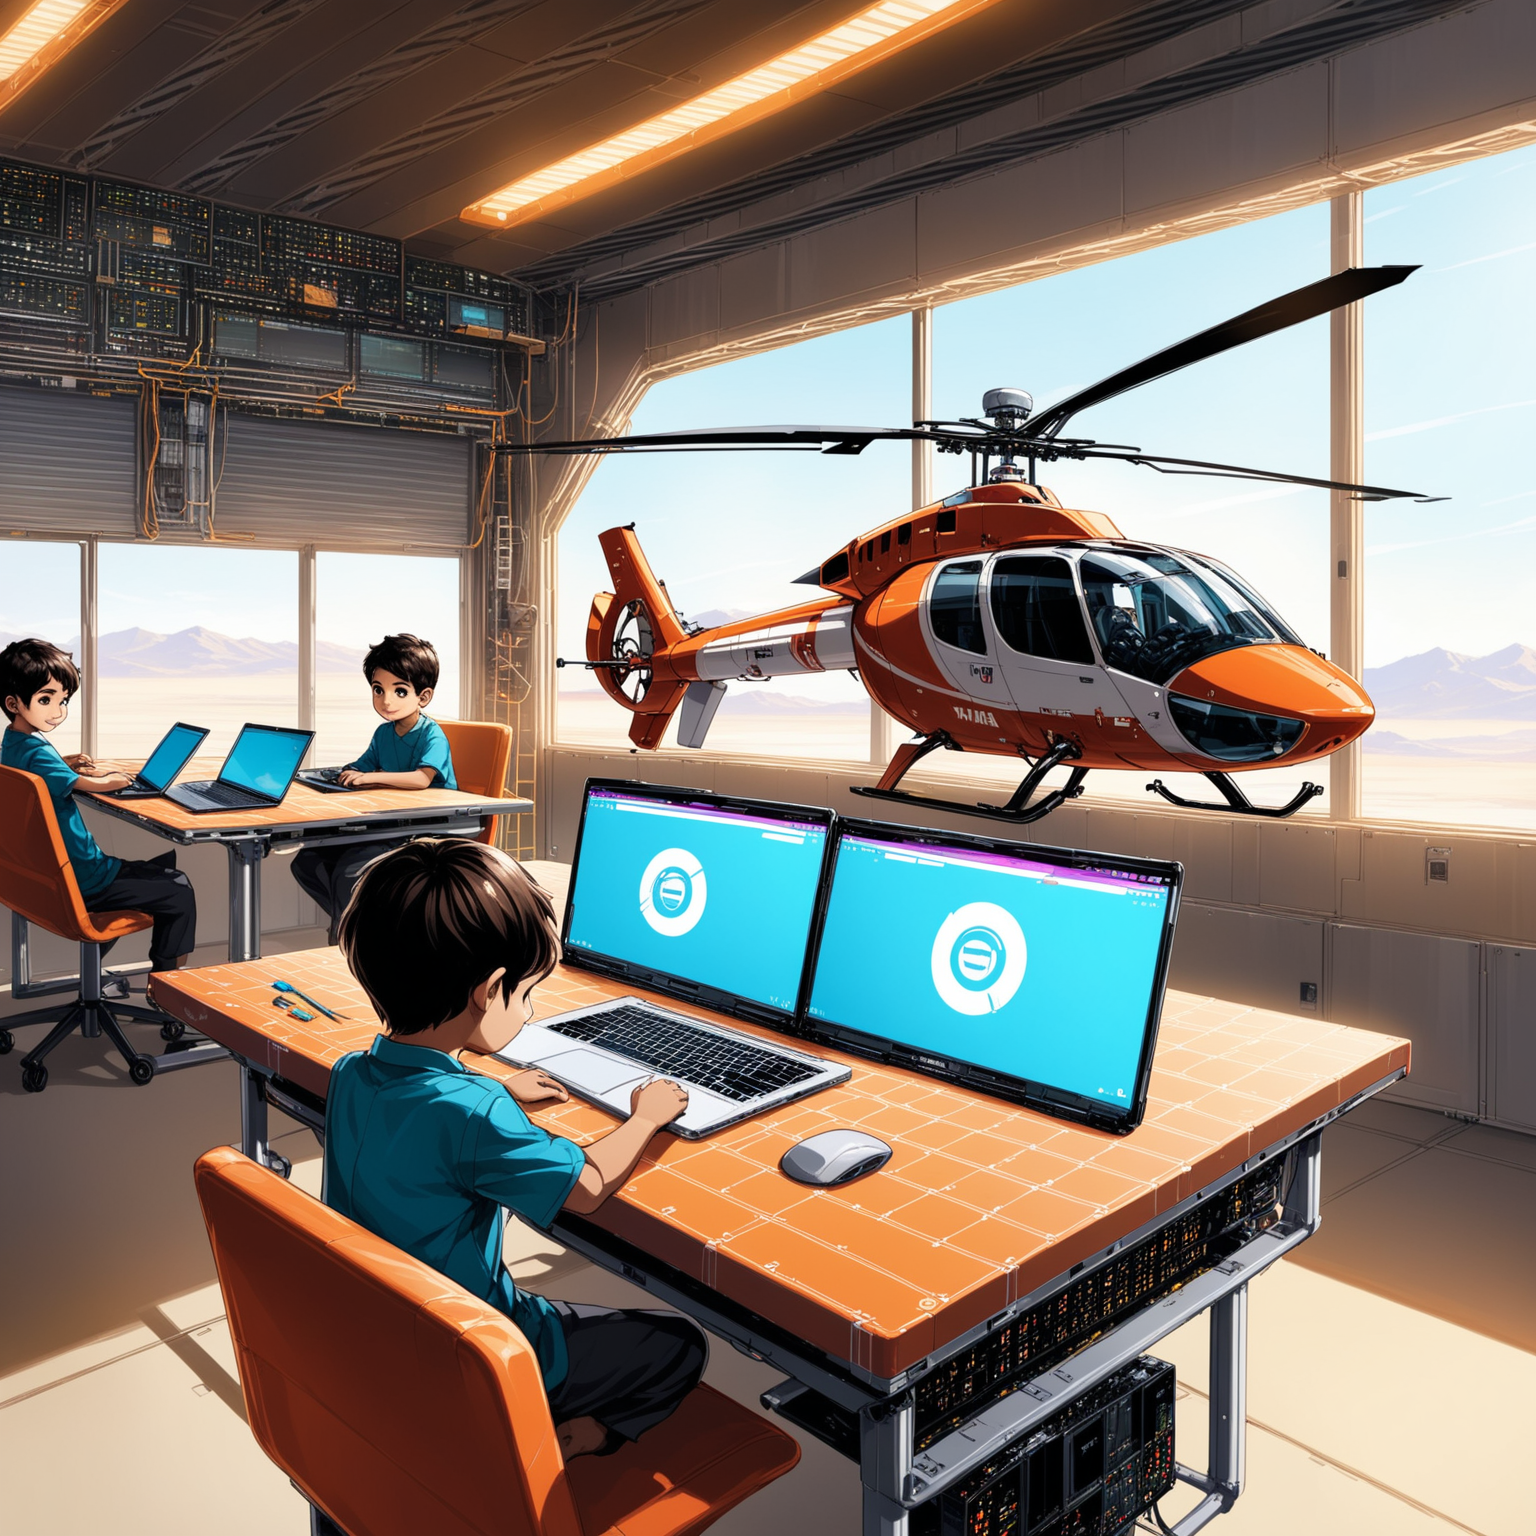 Persian Boys Designing and Building Helicopters in a Super Modern Workshop